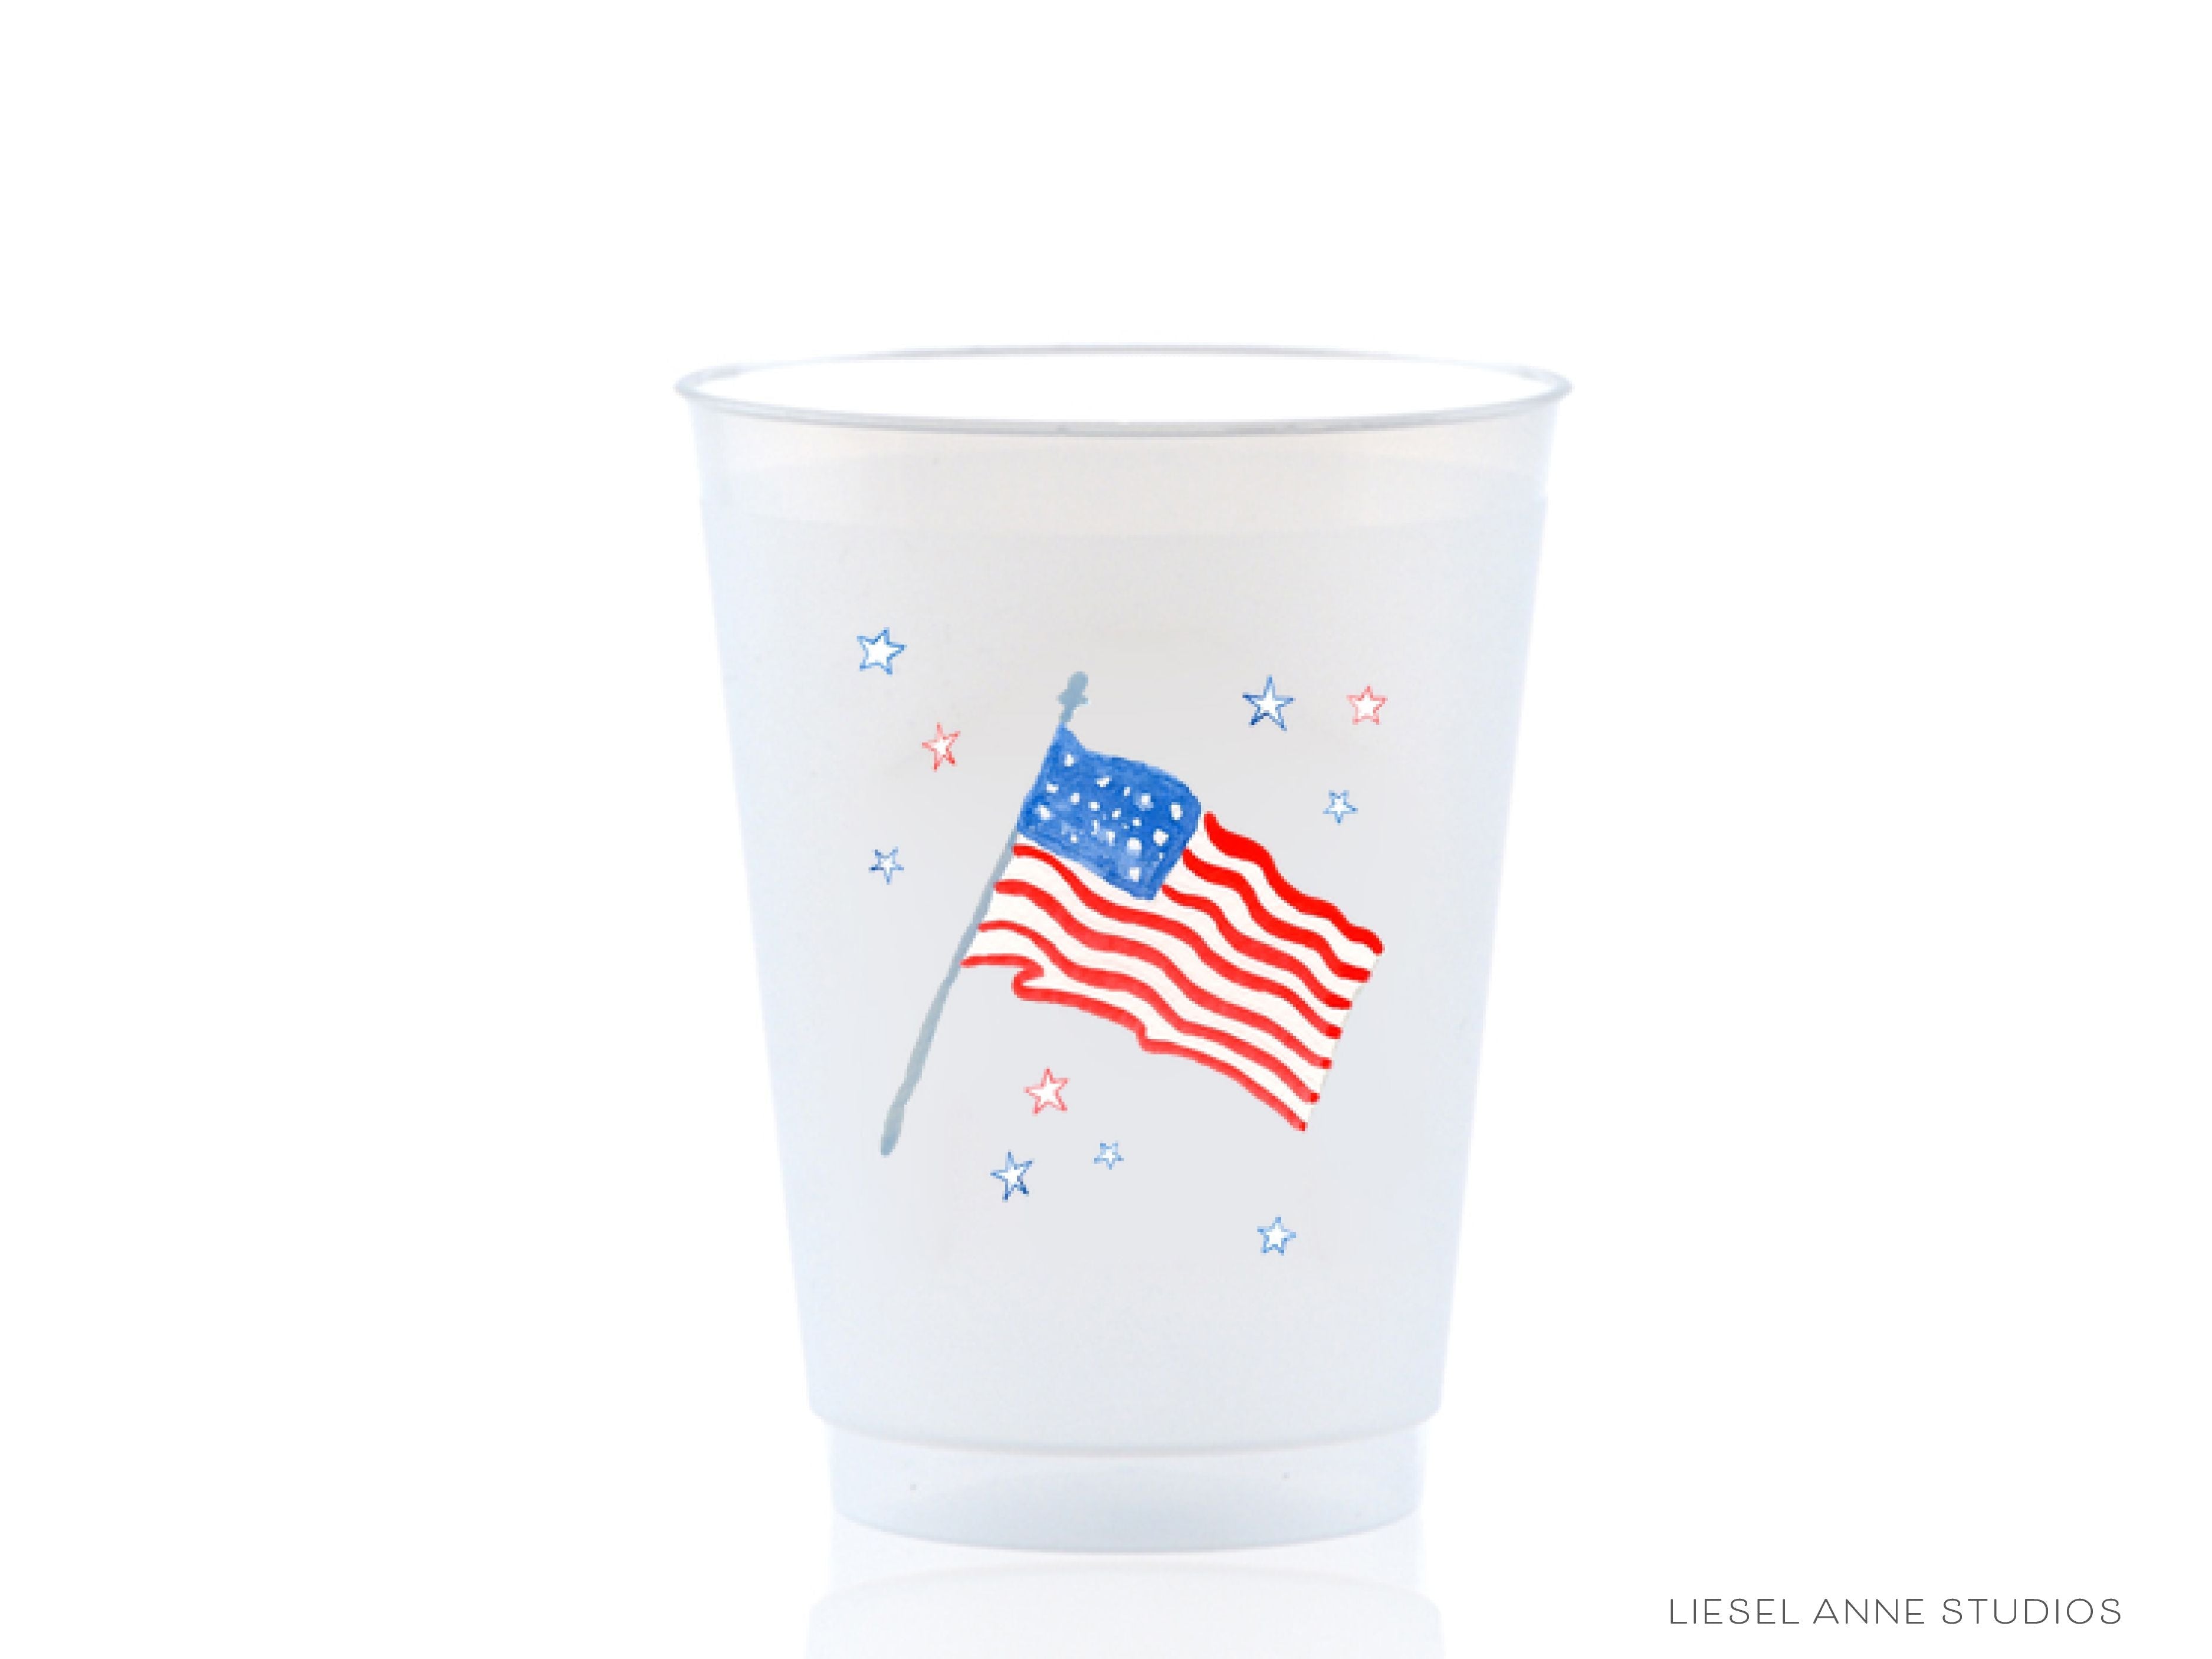 American Flag 16oz Shatterproof Cups [Set of 8]-These shatterproof cups feature our hand-painted American Flag & Stars and make great party decorations for your 4th of July cook outs, patriotic pool parties, military homecomings and more! They come in sets of 8 and are re-usable for other parties to come or make wonderful party favors!-The Singing Little Bird